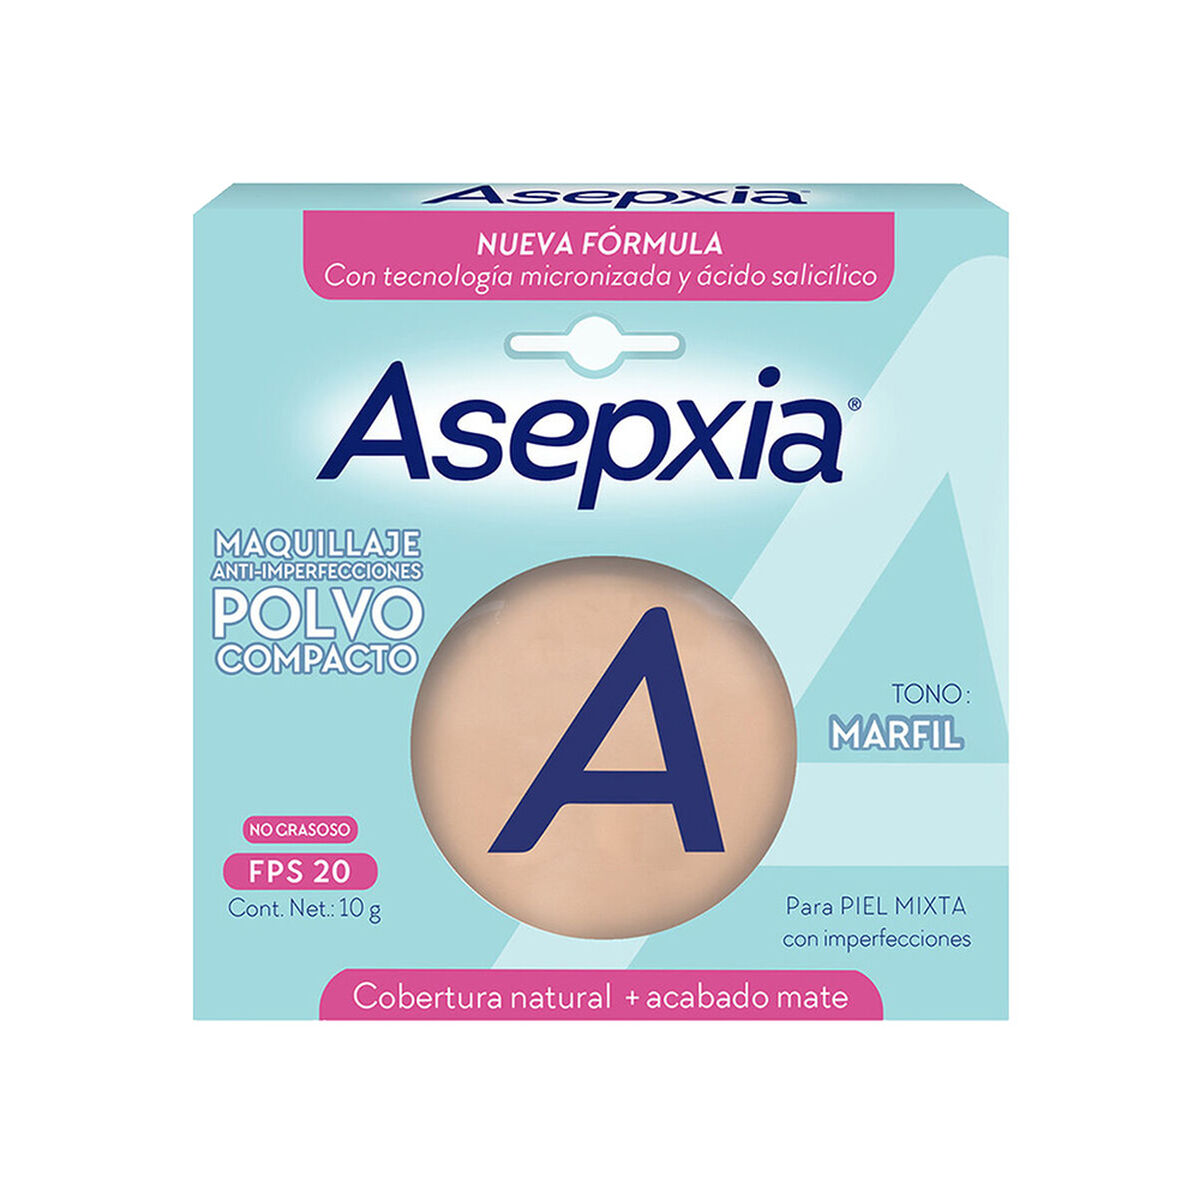 Asepxia Maquillaje Polvo Compacto Marfil 10 gr